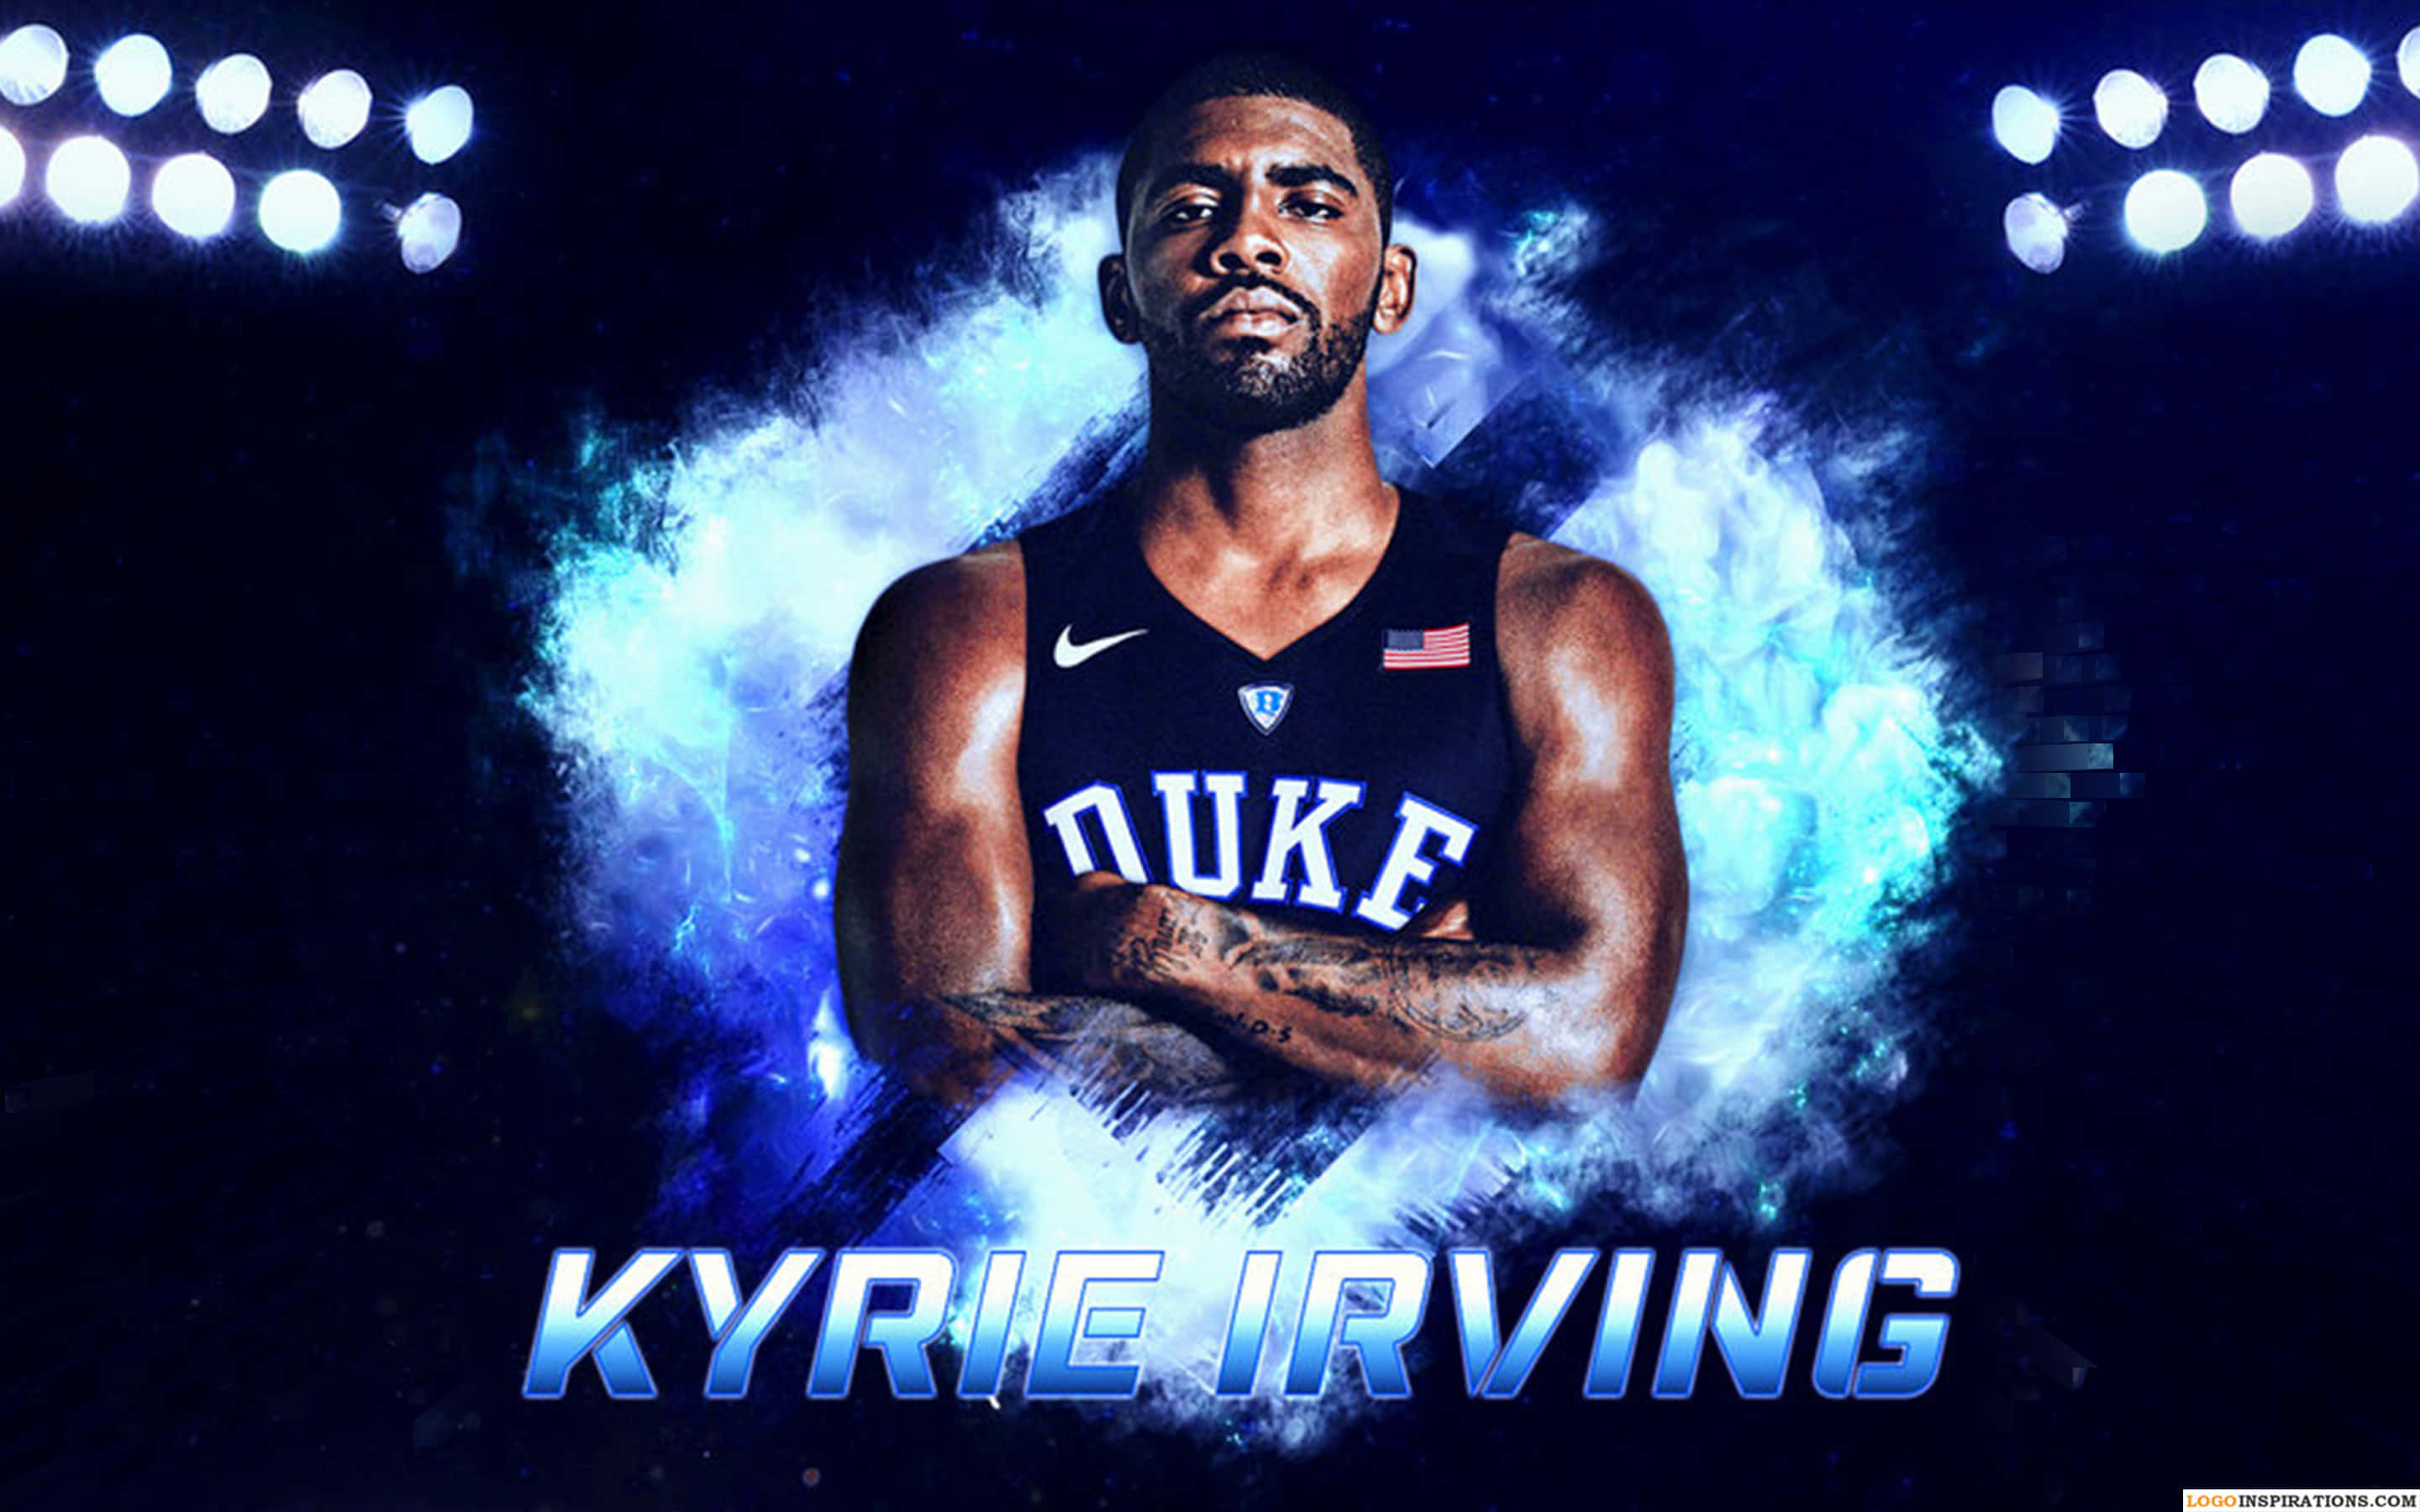 Kyrie Irving Living His Best Life. Wallpaper